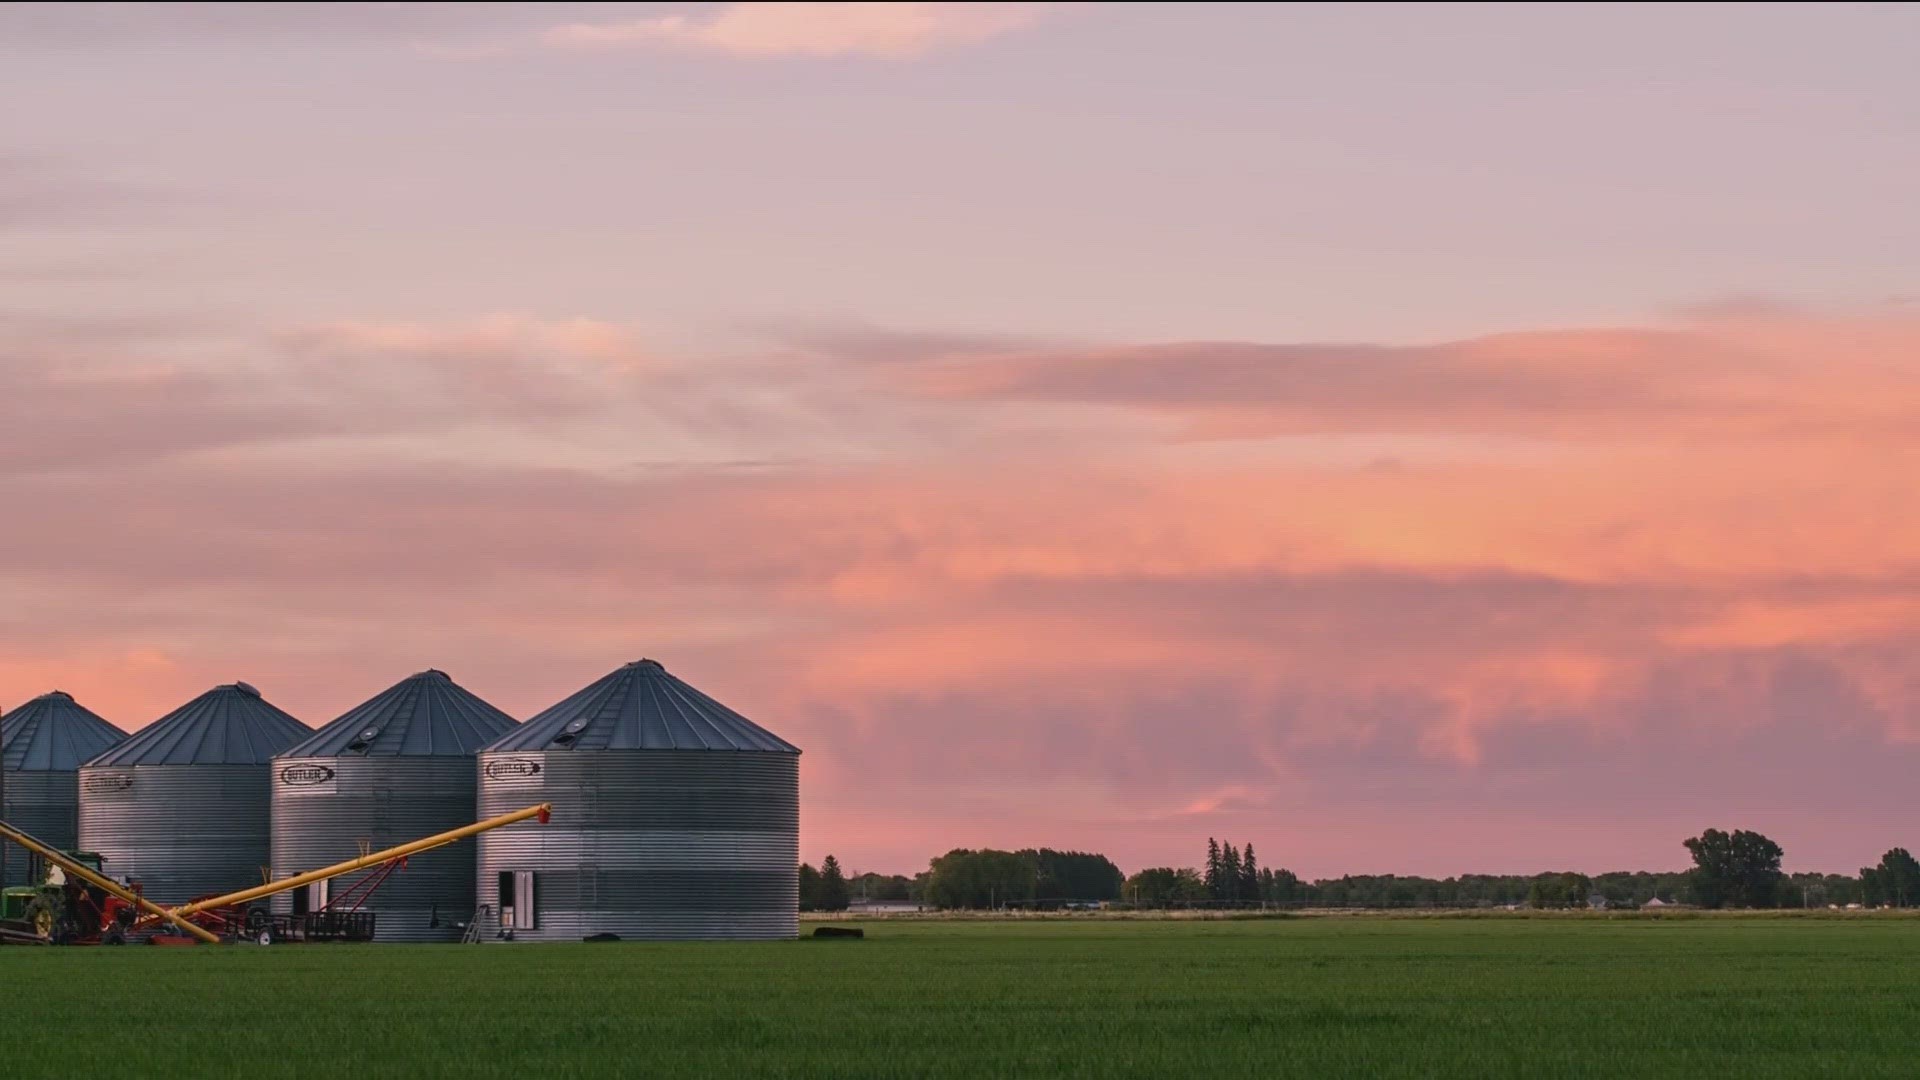 As builders keep building, it's important to remember what they're building on: farmland.